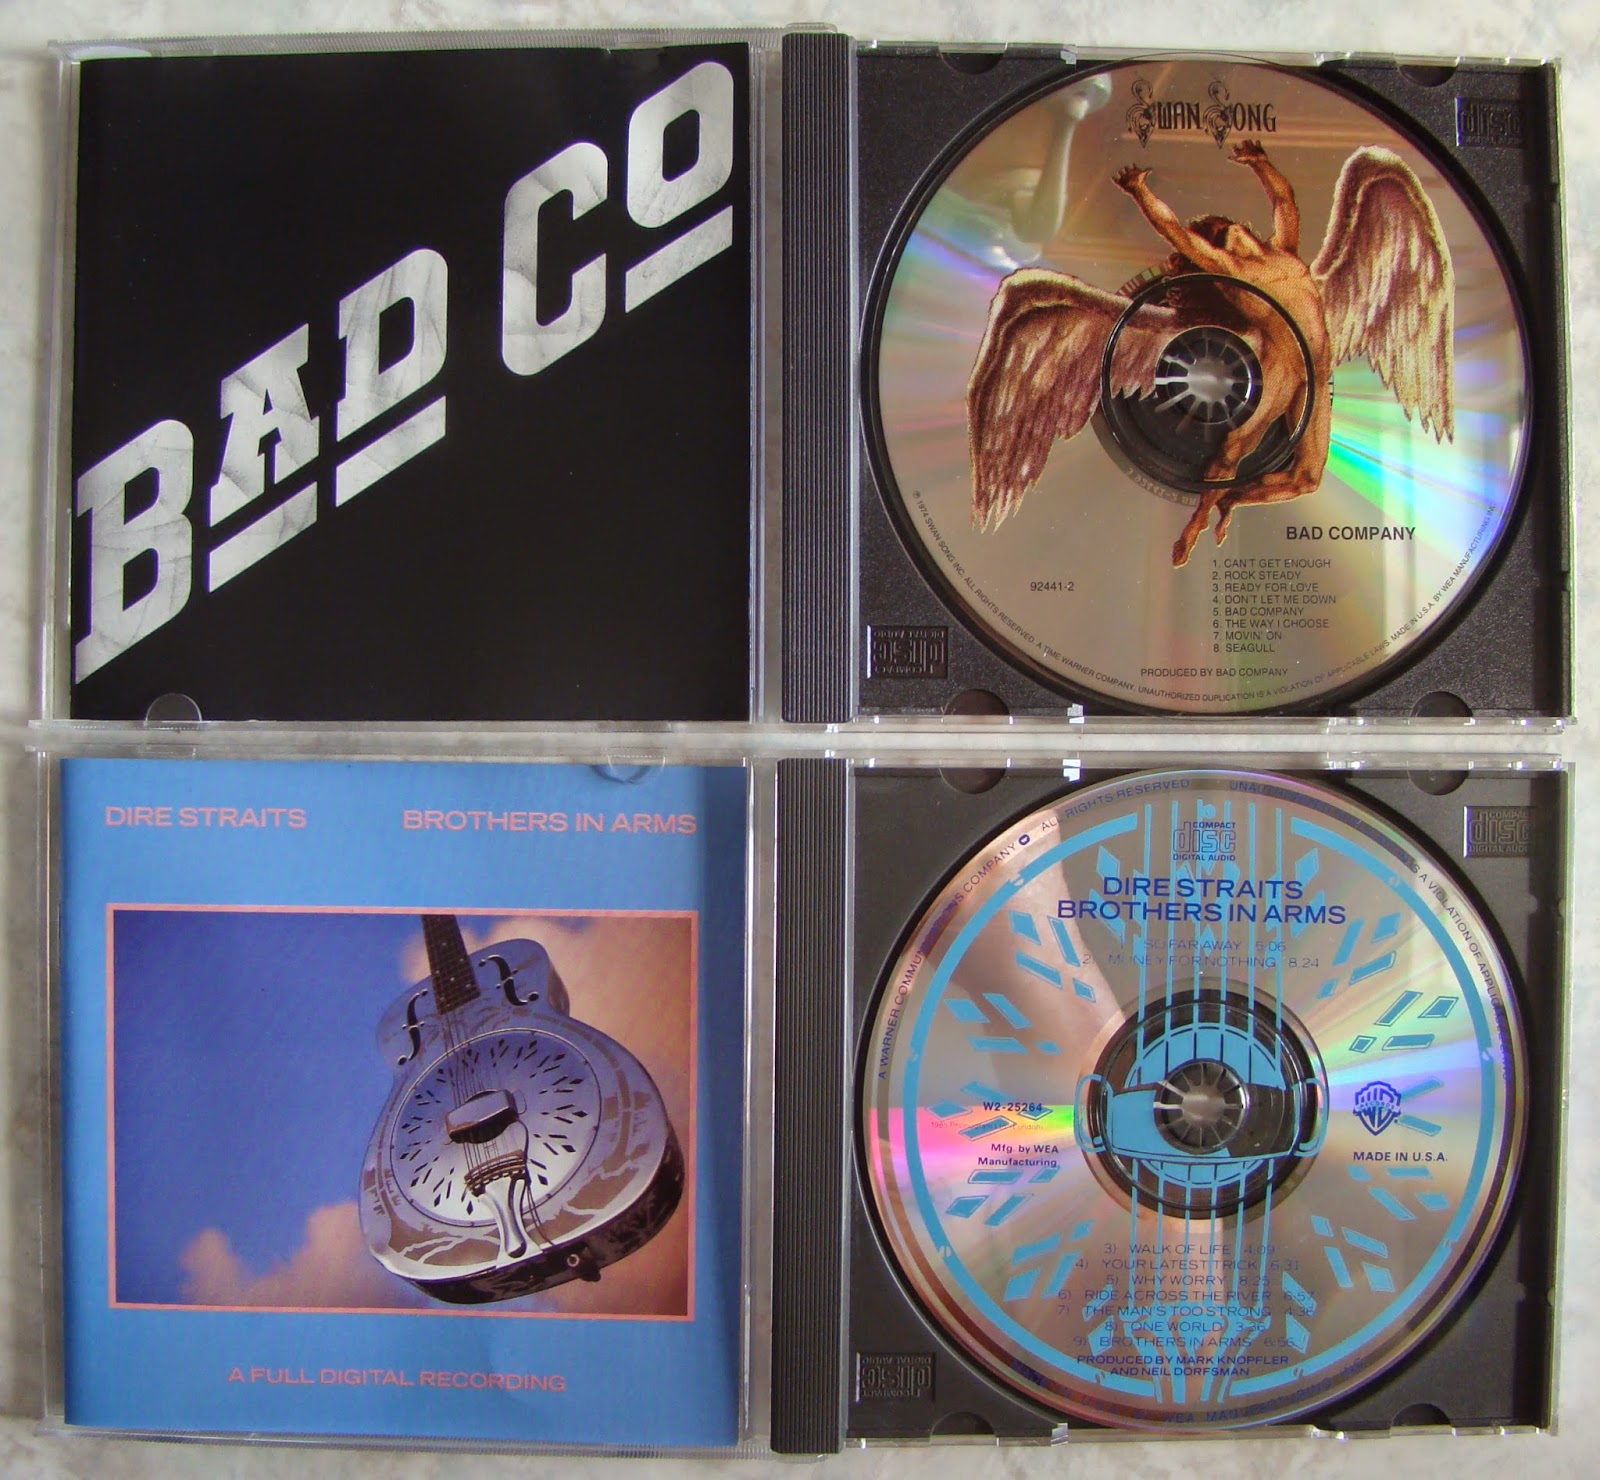 Imported audiophile CDs (sold) CD+bad+company